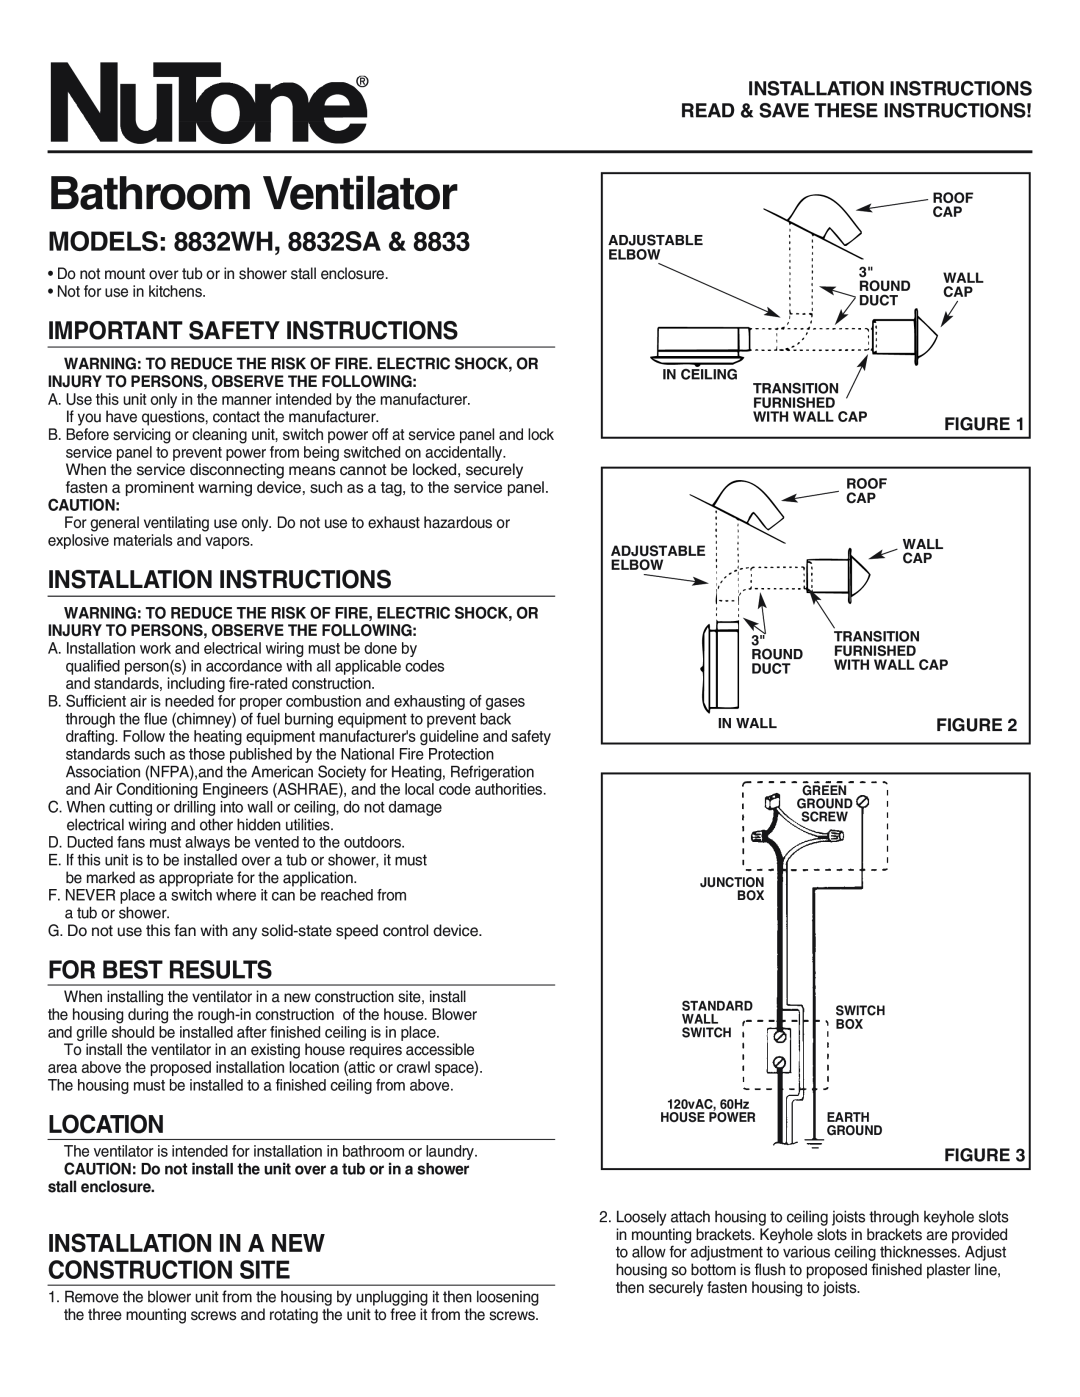 NuTone important safety instructions MODELS 8832WH, 8832SA, Important Safety Instructions, Installation Instructions 